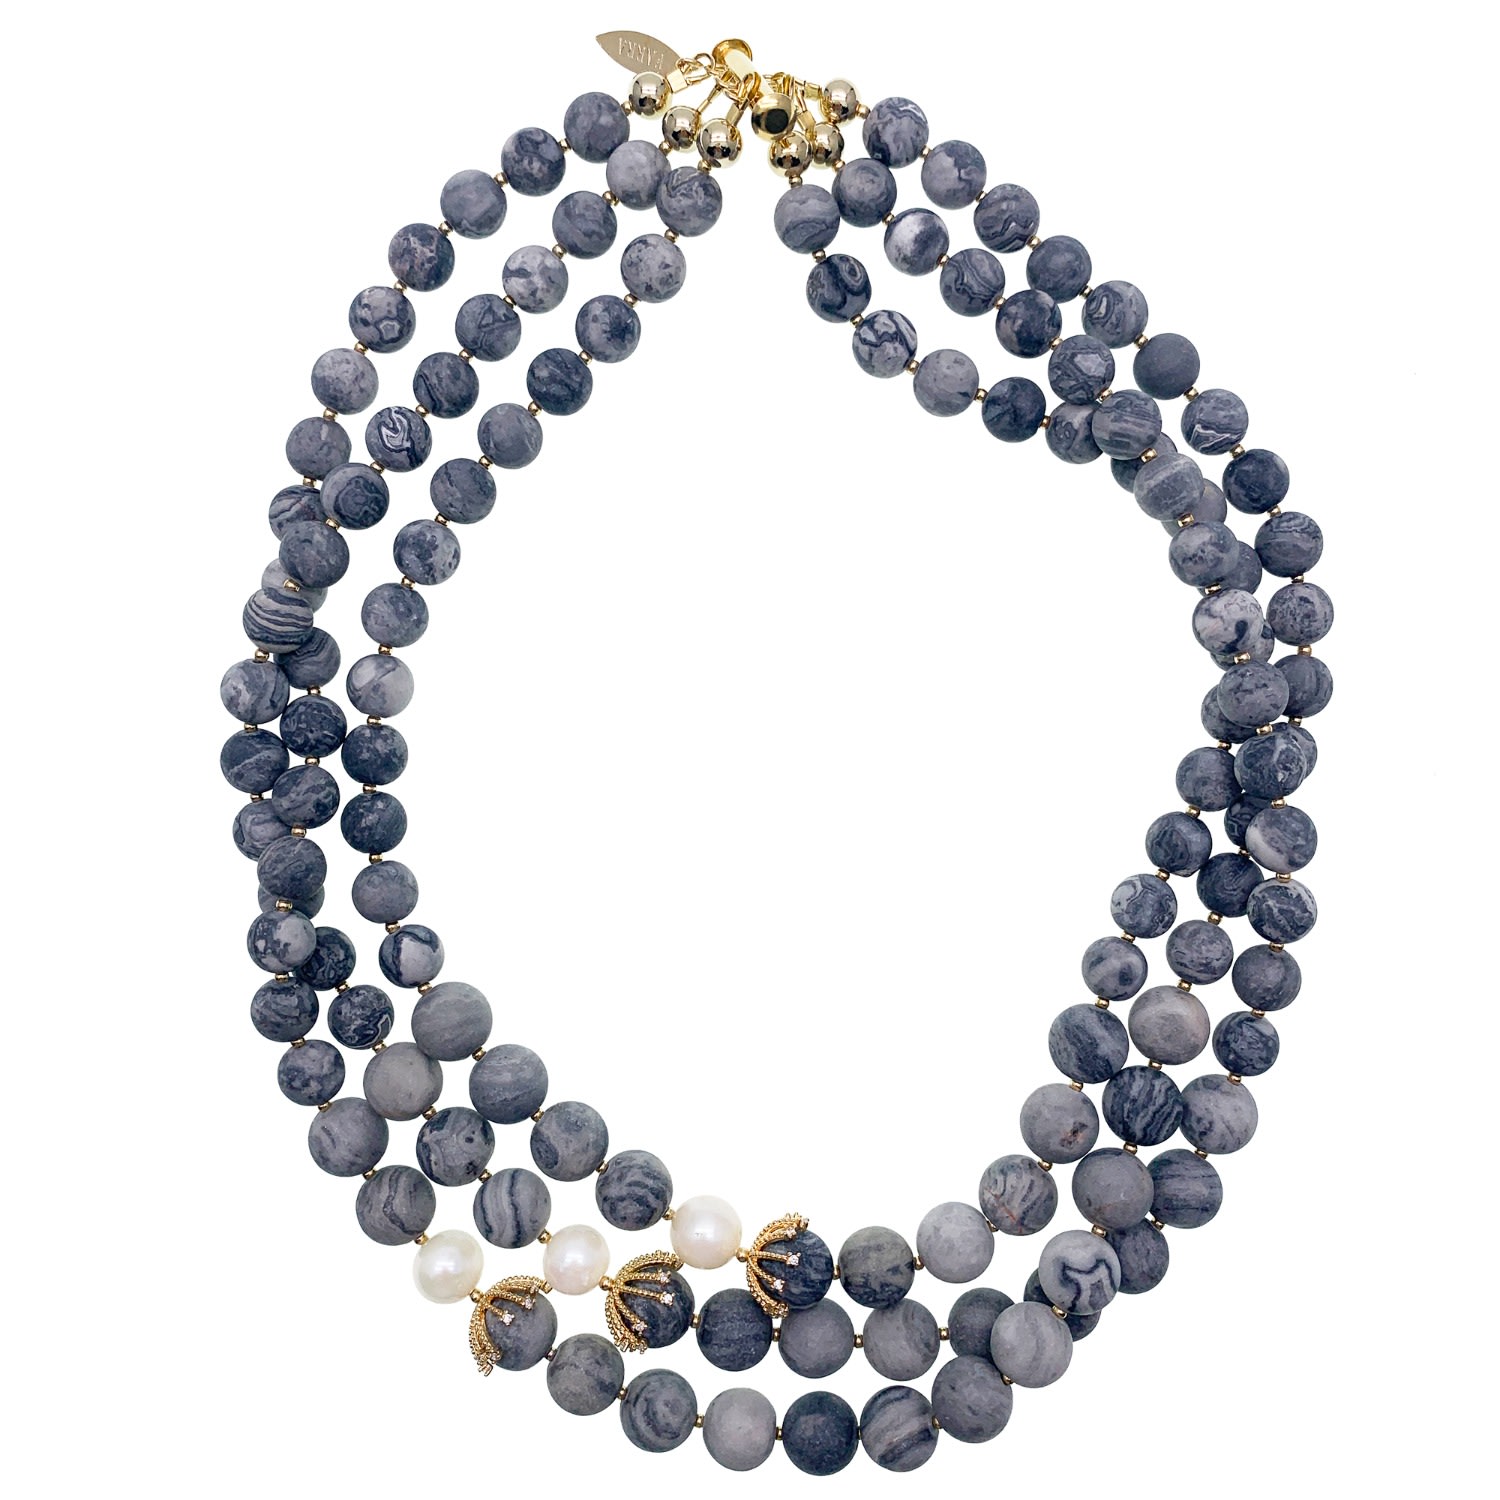 Farra Women's Grey / White Classic Multi-layers Gray Agate With White Pearls Statement Necklace